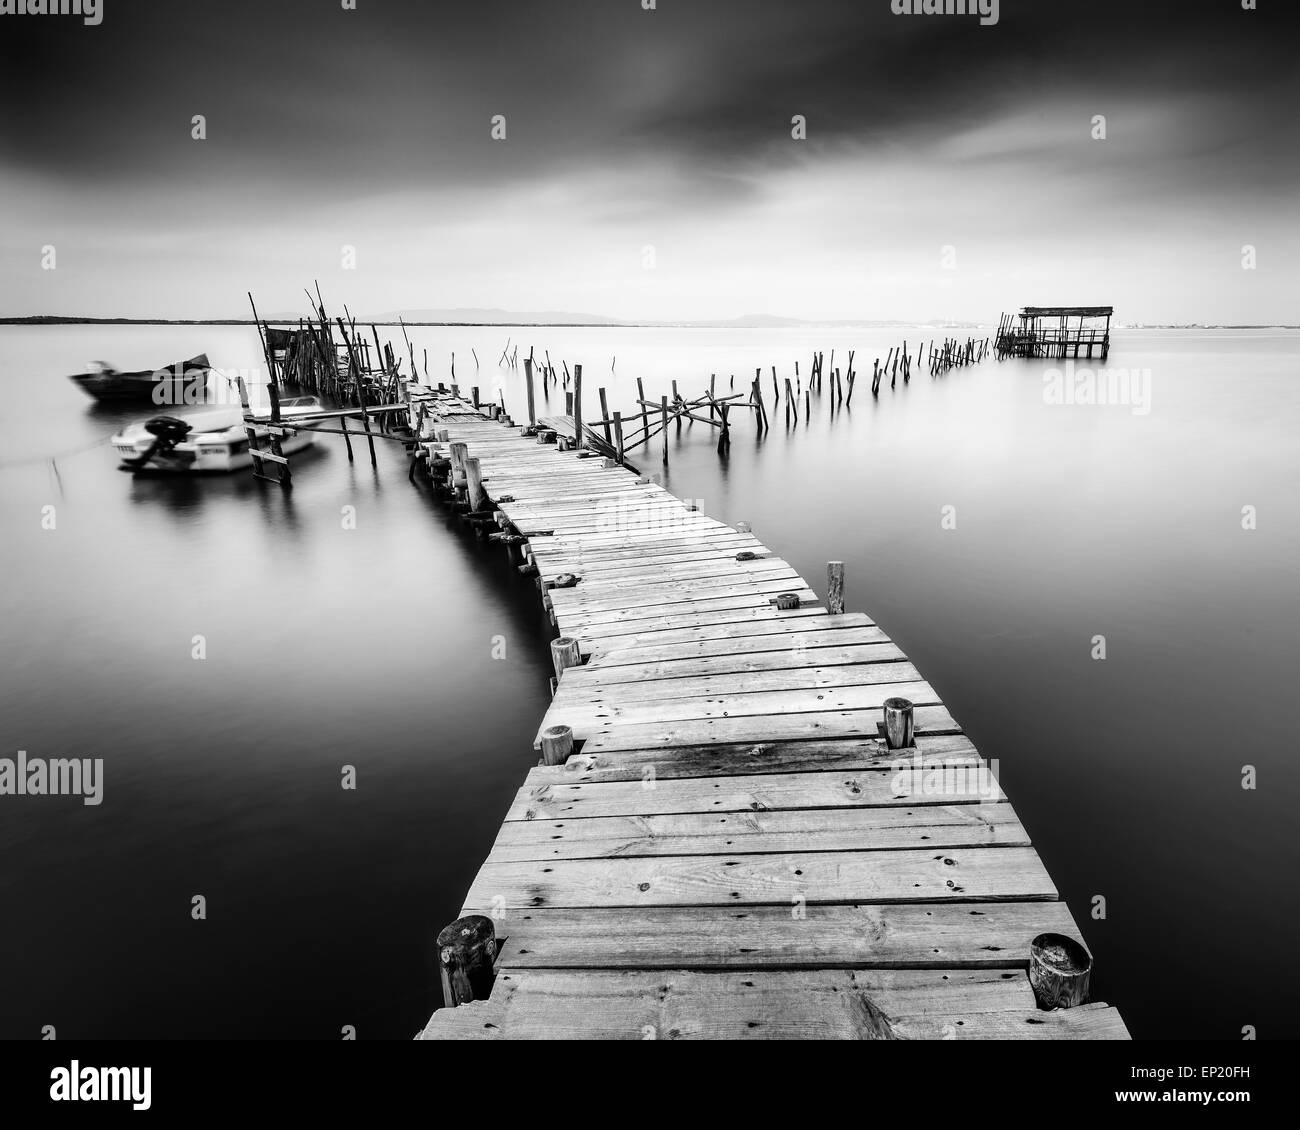 Dilapidated old pier in Carrasqueira, Portugal Stock Photo